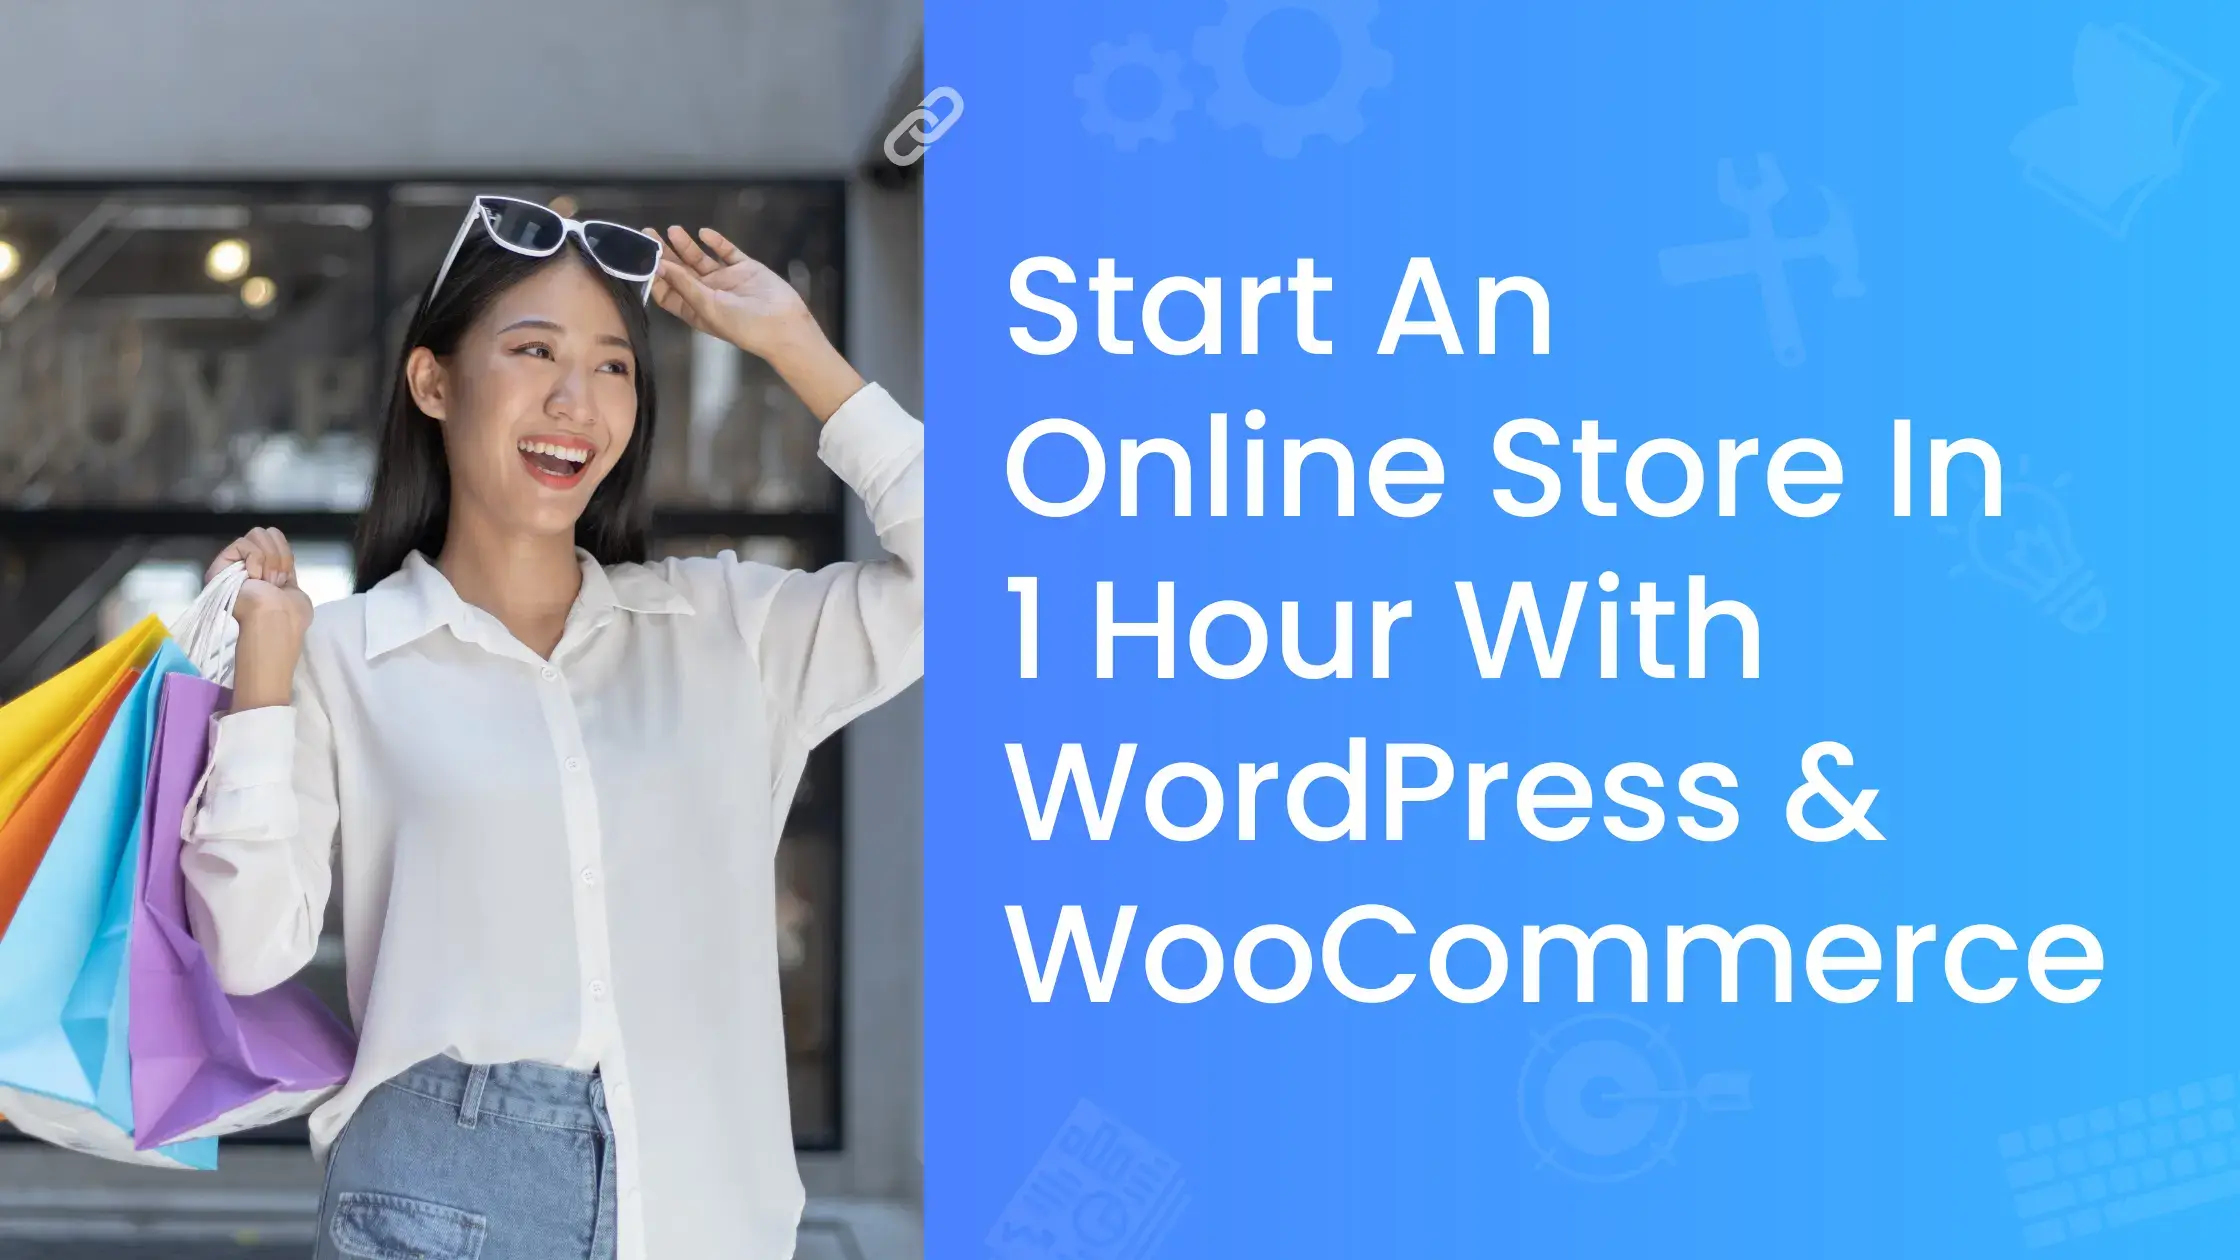 woocommerce guide how to start an online store in 1 hour